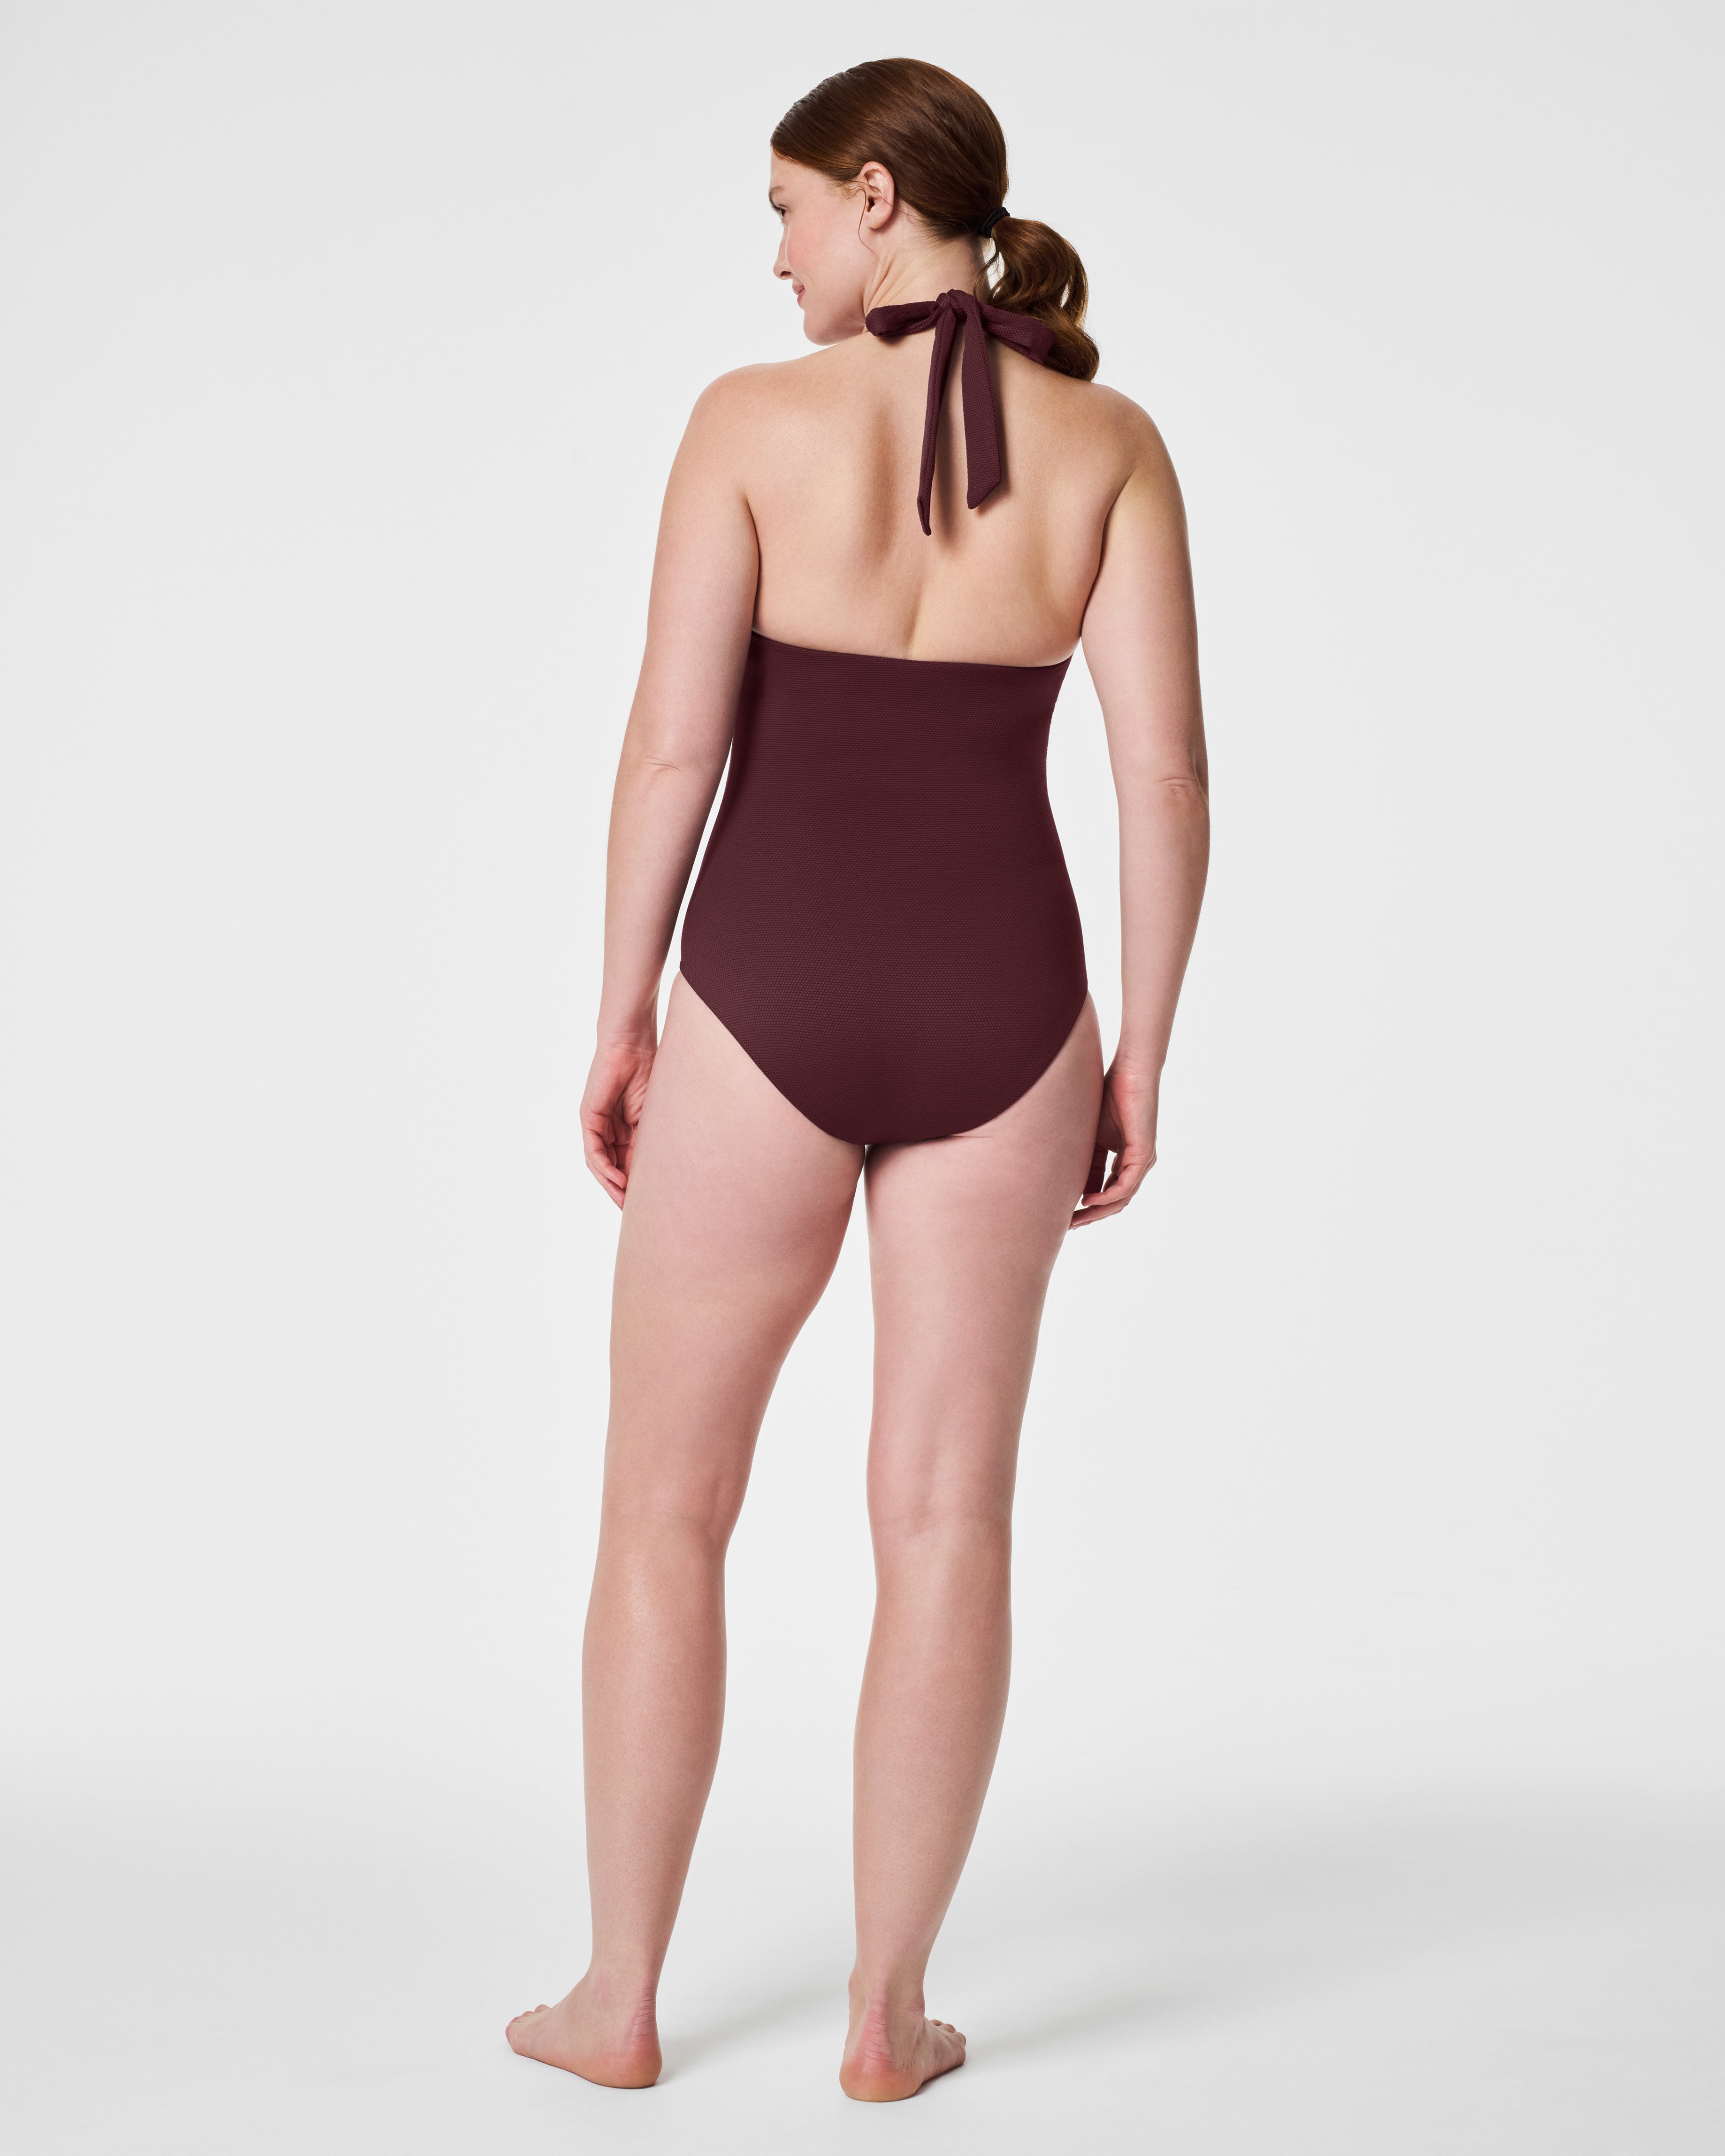 Spanx Love Your Assets One Piece Swimsuit and 19 similar items